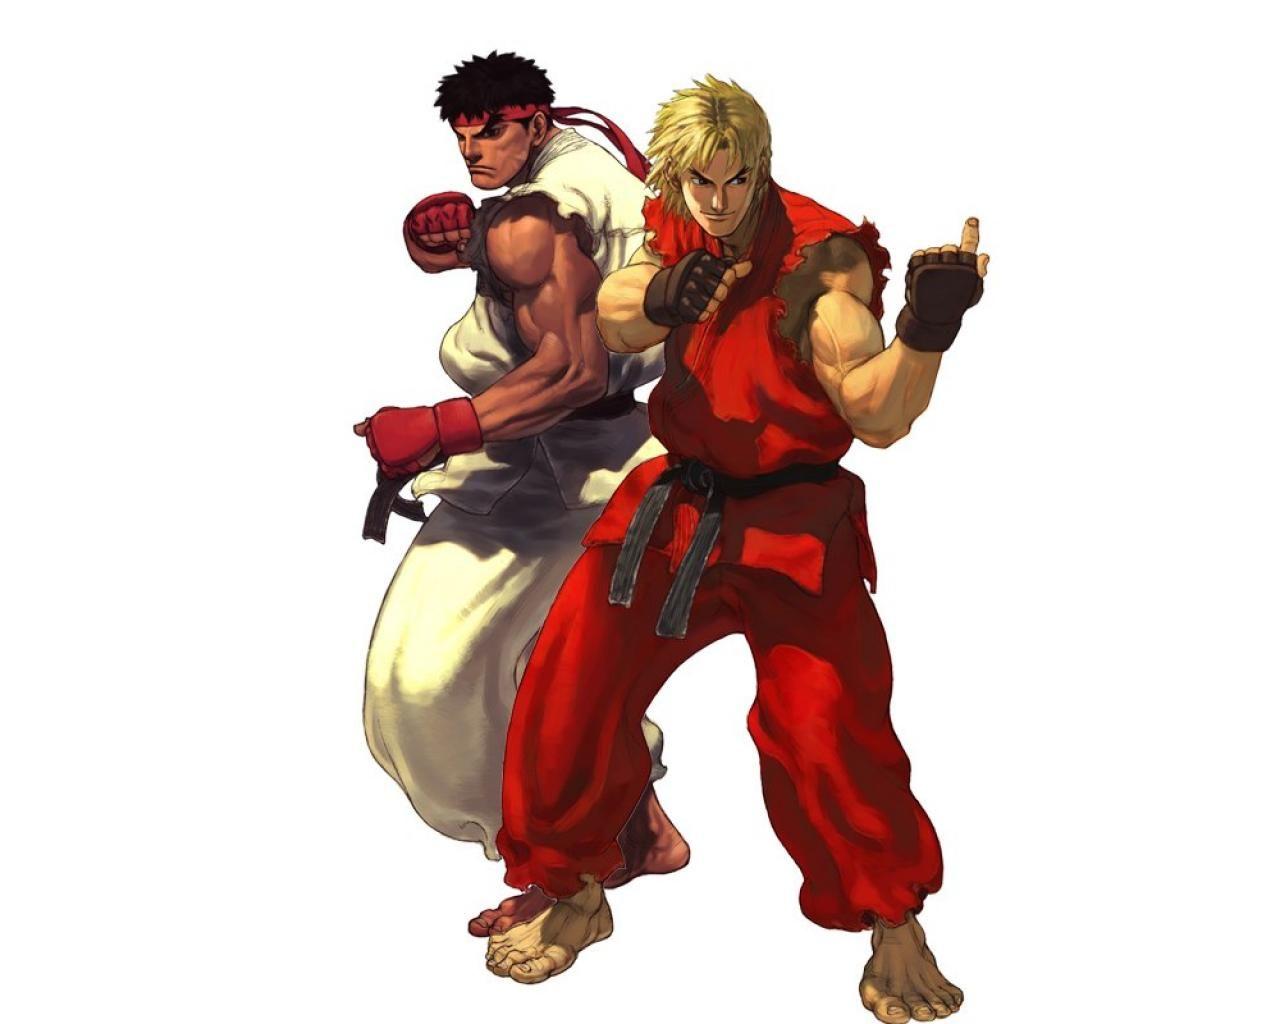 New Street Fighter Ken Photo and Picture, Street Fighter Ken